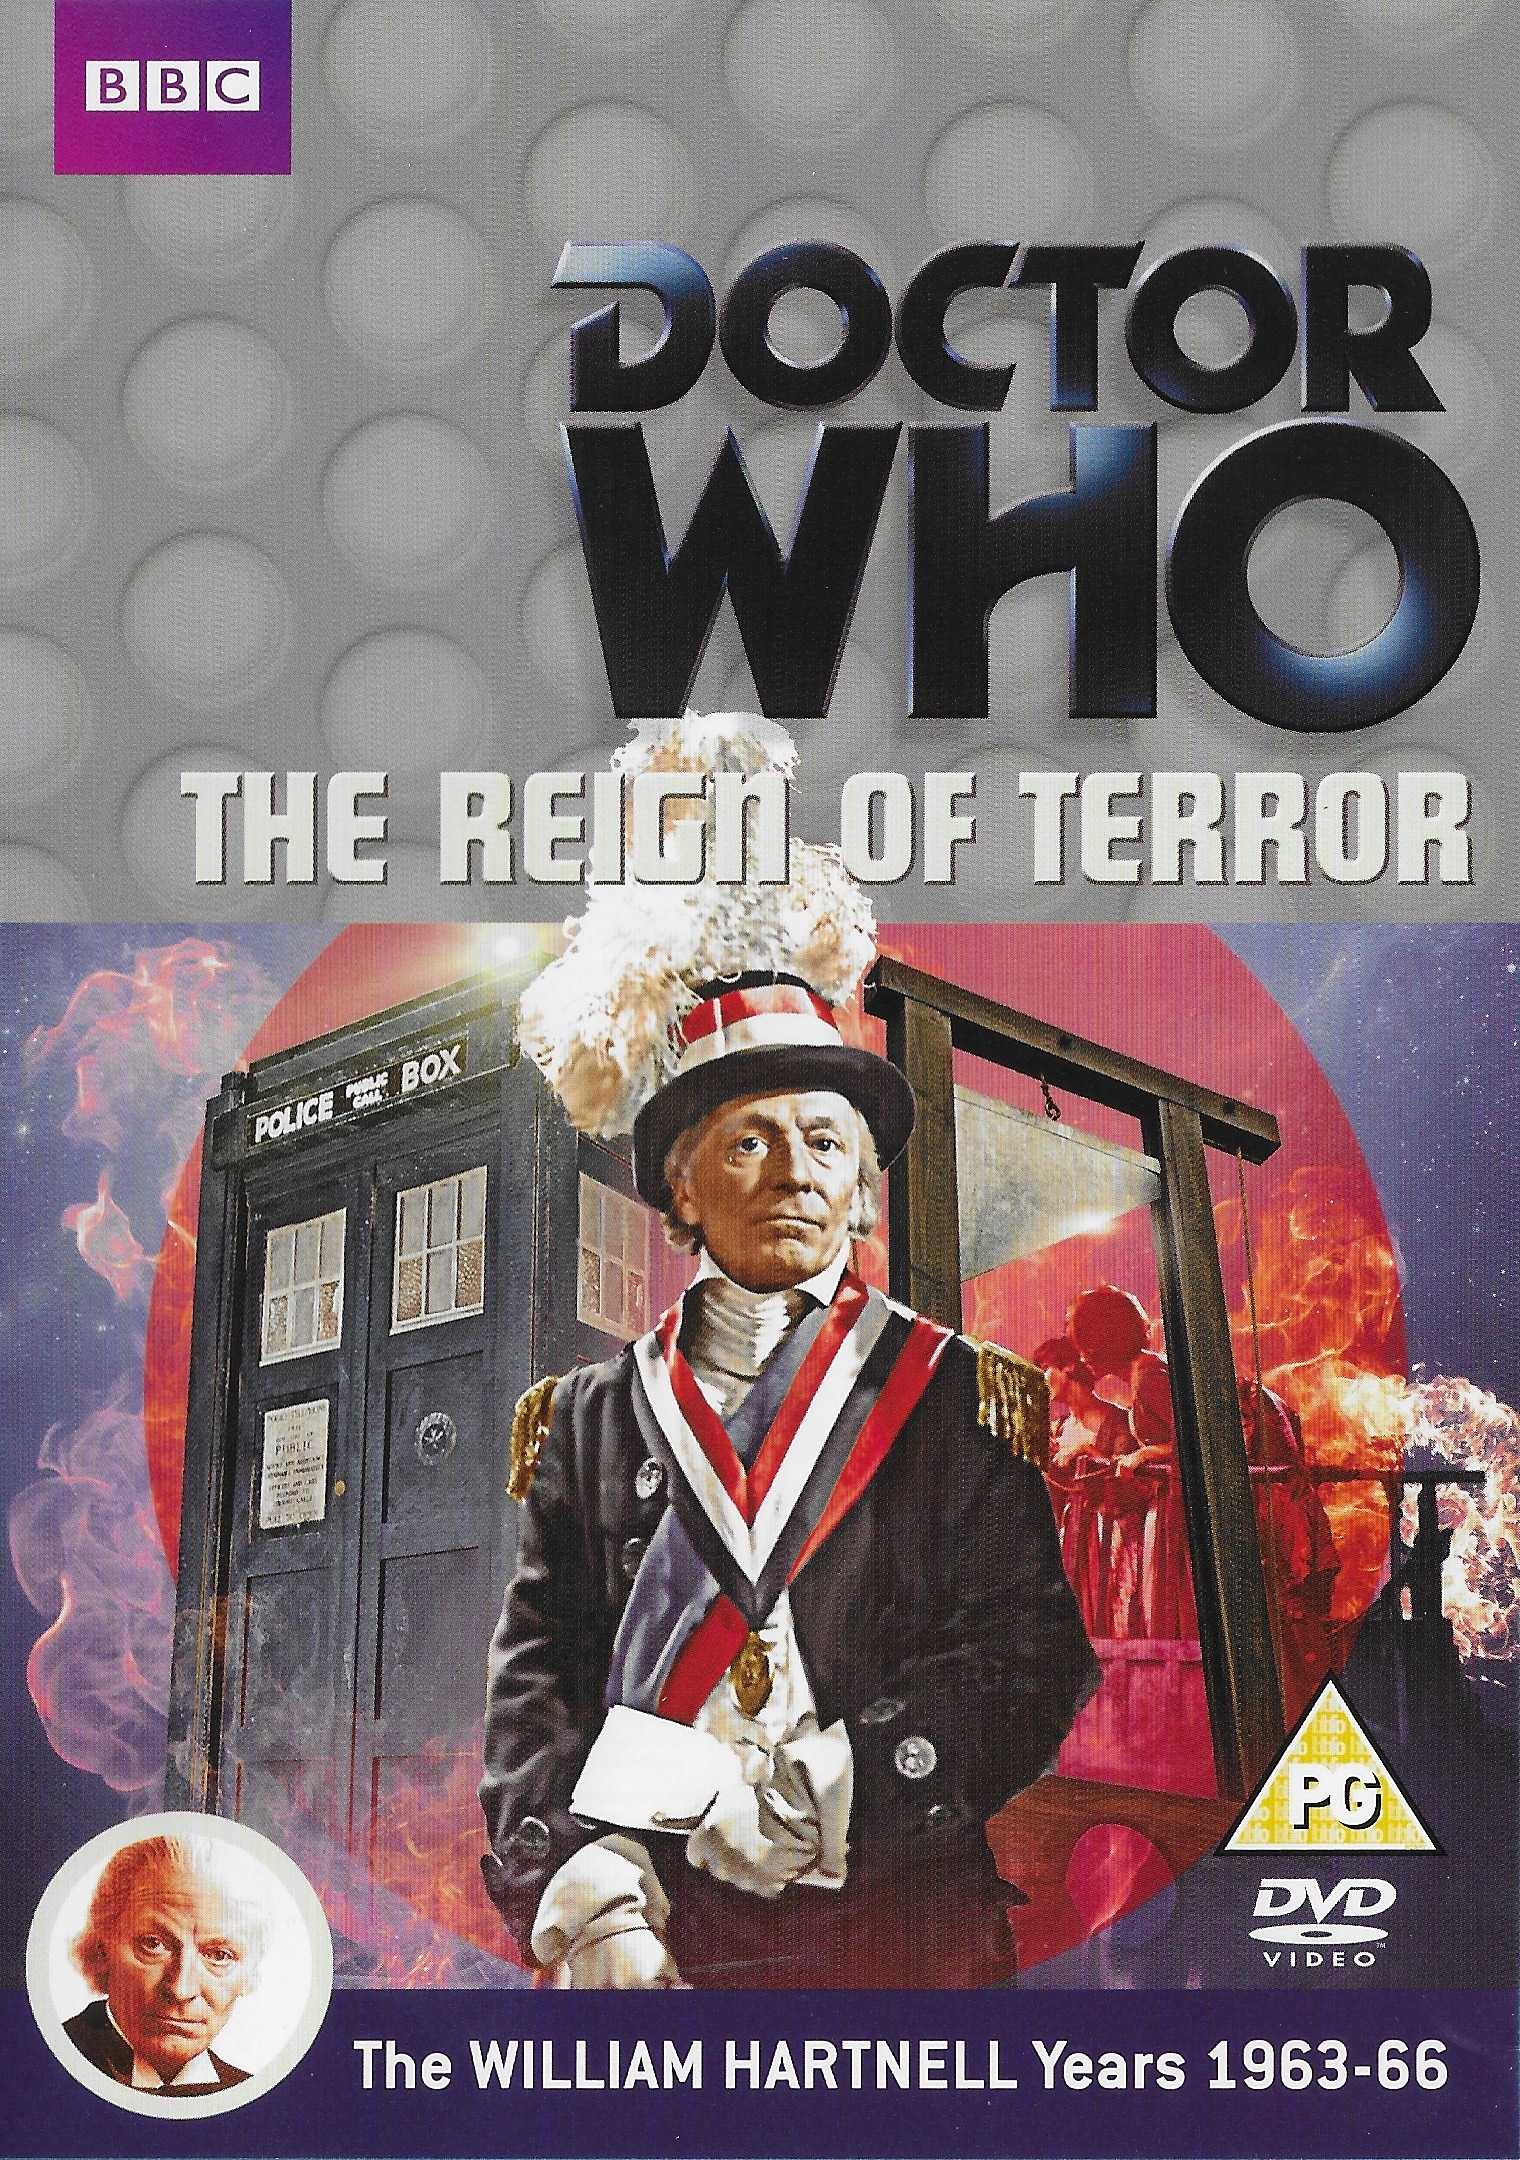 Picture of BBCDVD 3528 Doctor Who - The reign of terror by artist Dennis Spooner from the BBC dvds - Records and Tapes library